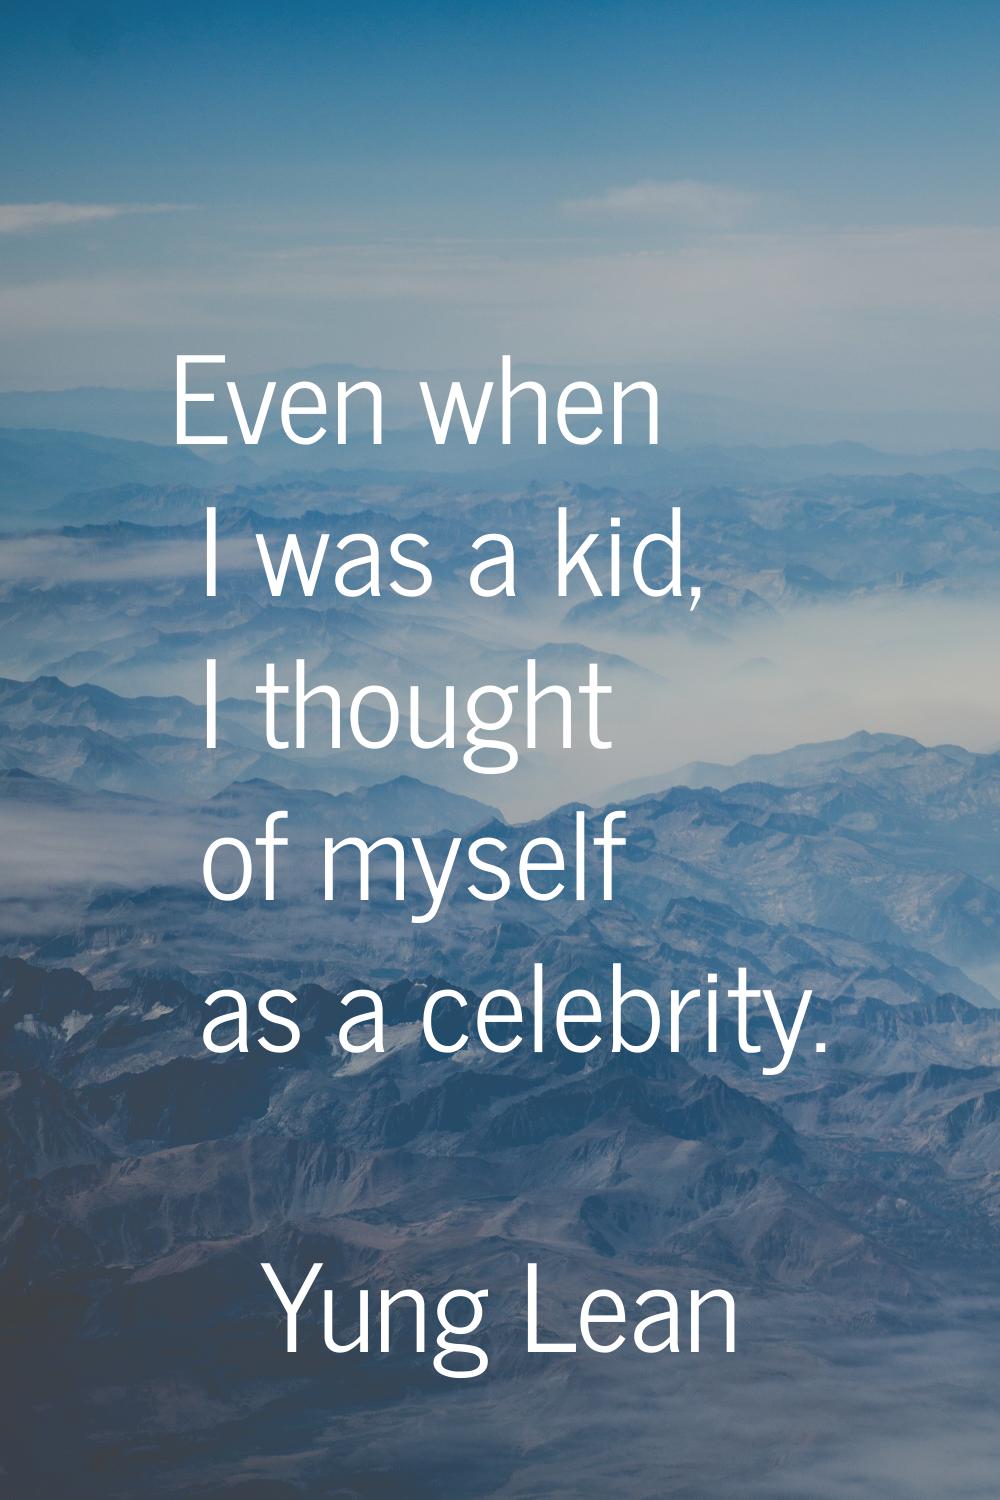 Even when I was a kid, I thought of myself as a celebrity.